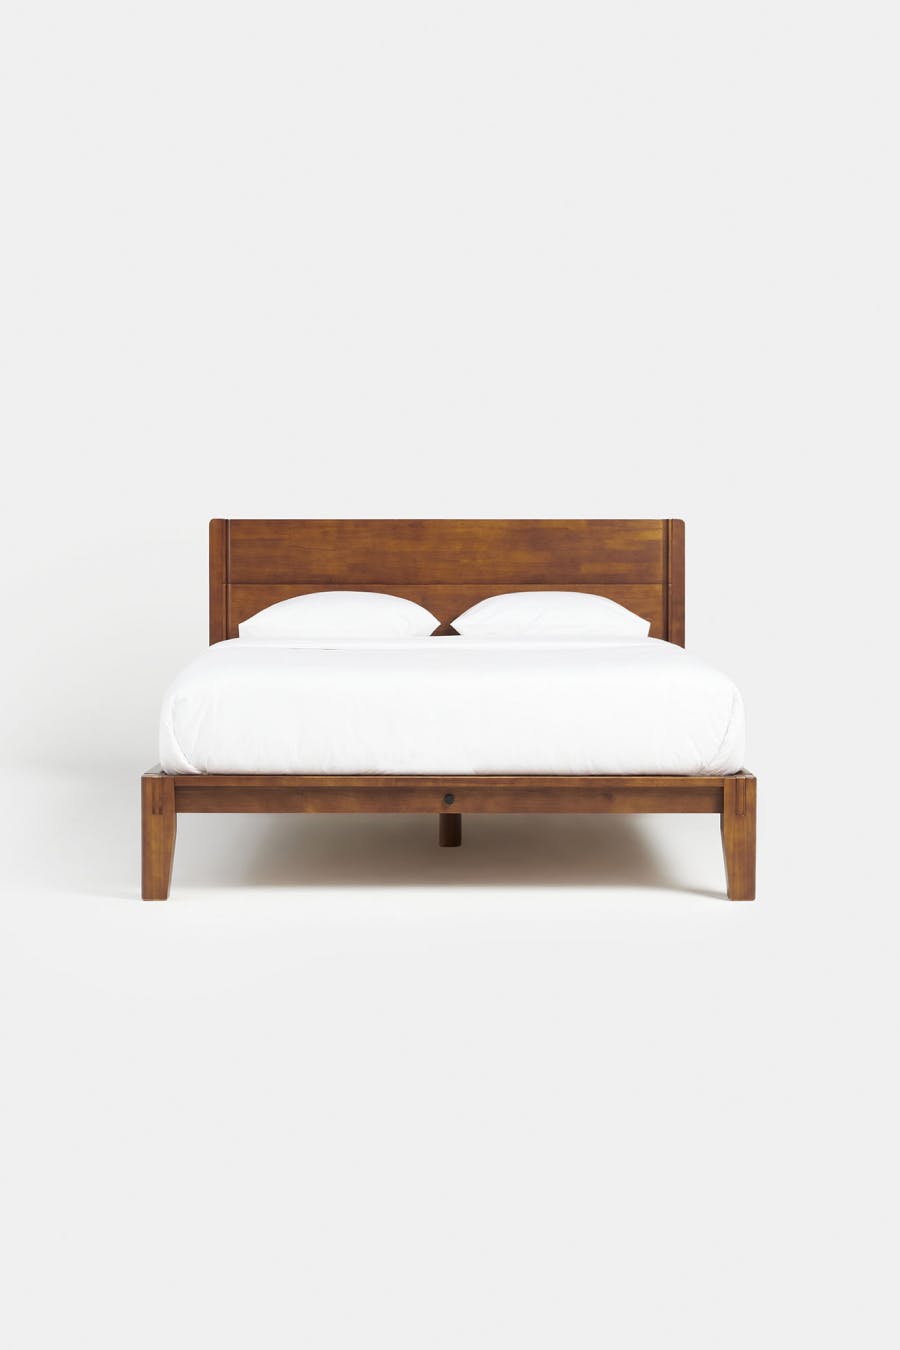 Shop by Category - Beds